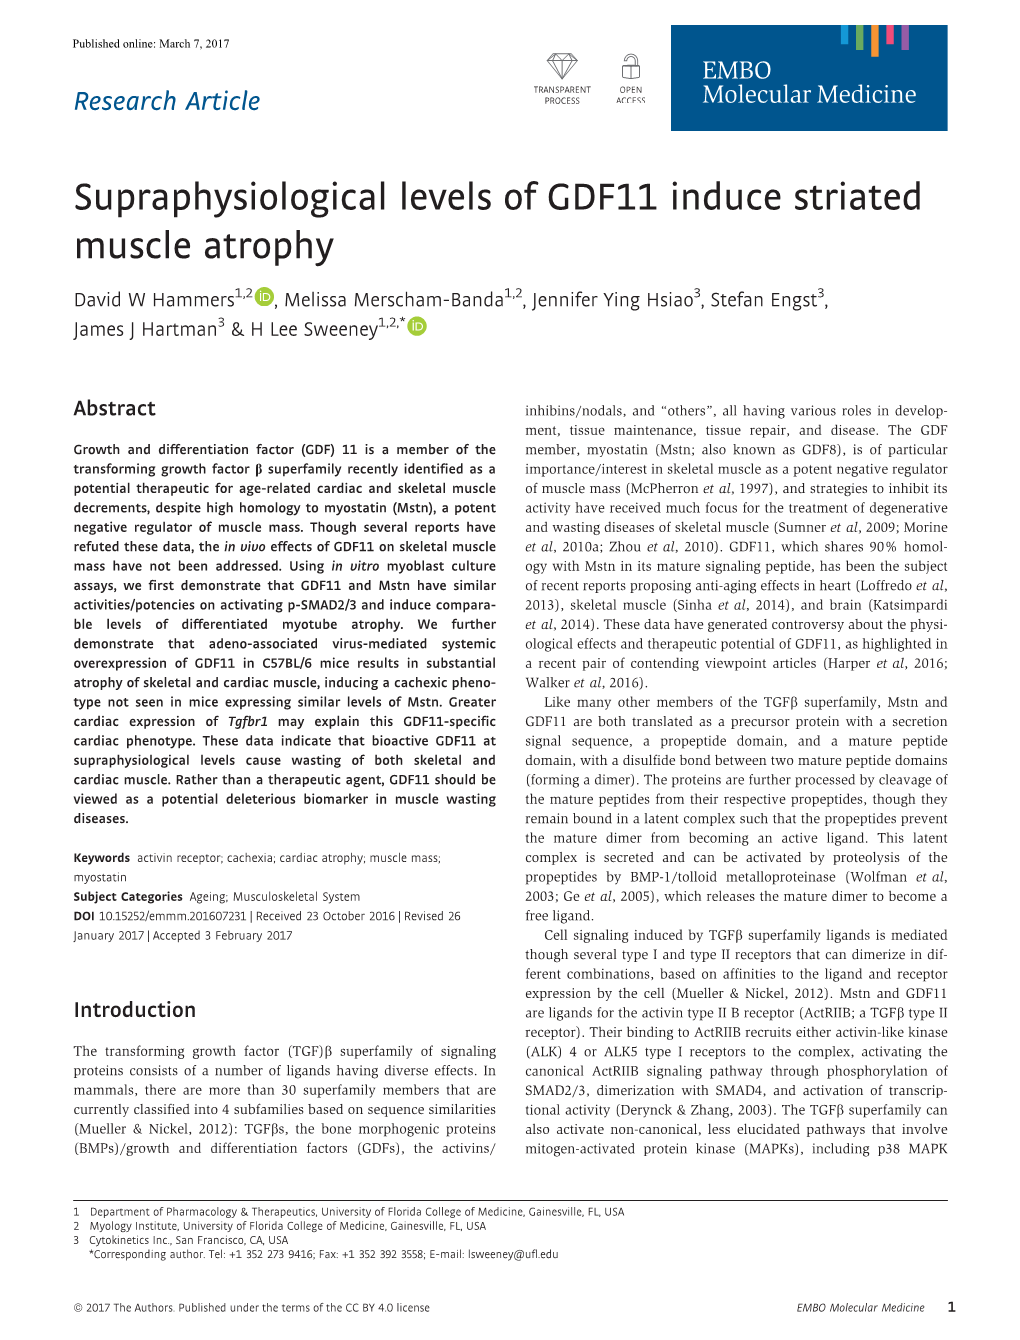 Supraphysiological Levels of GDF11 Induce Striated Muscle Atrophy